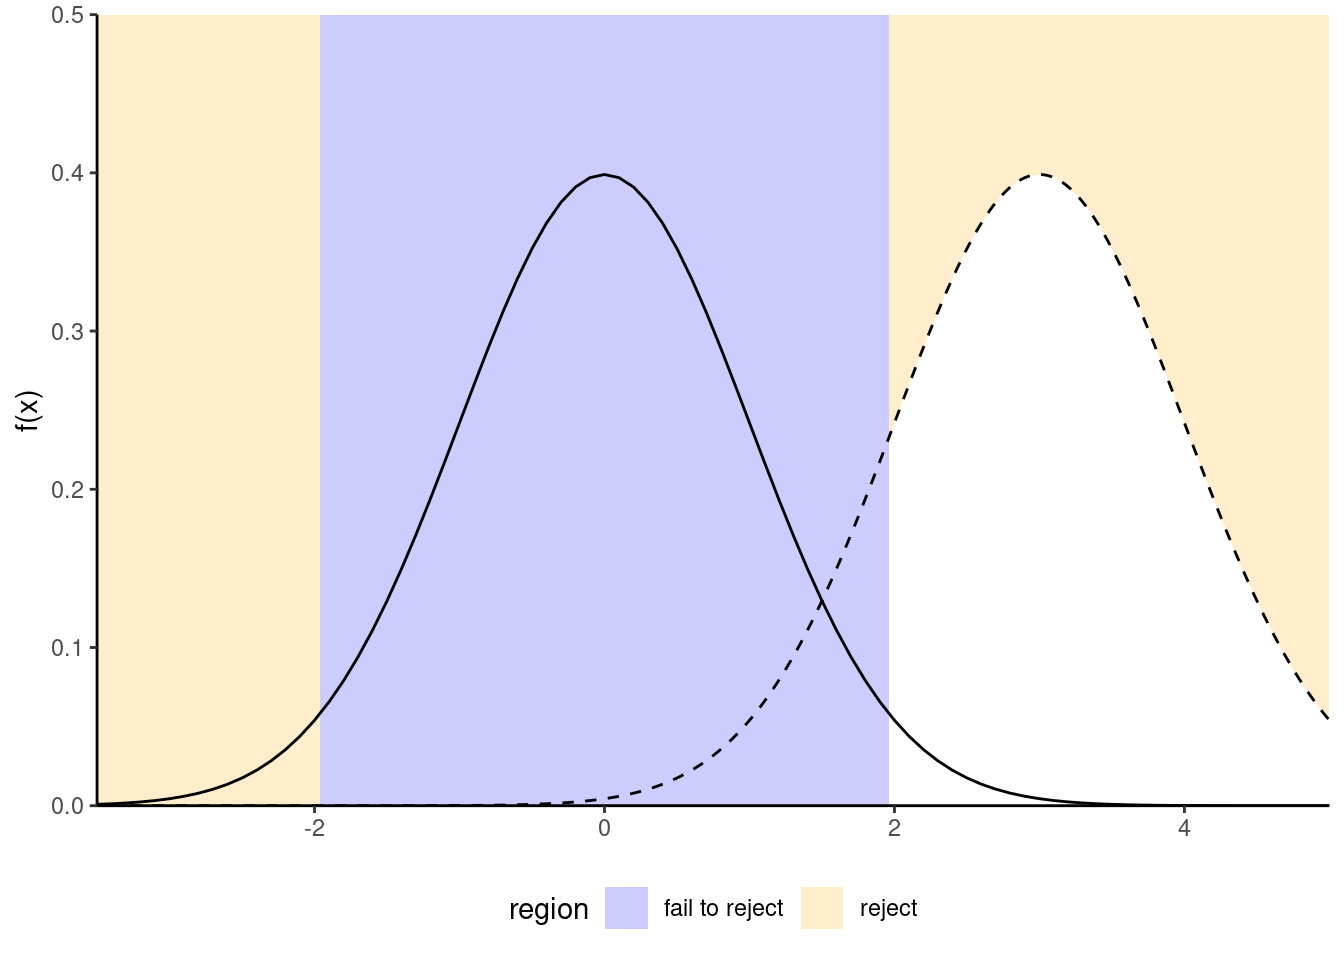 Increase in power due to an increase in the mean difference between the null and alternative hypothesis. Power is the area in the rejection region (in white) under the alternative distribution (dashed): the latter is more shifted to the right relative to the null distribution (full line).